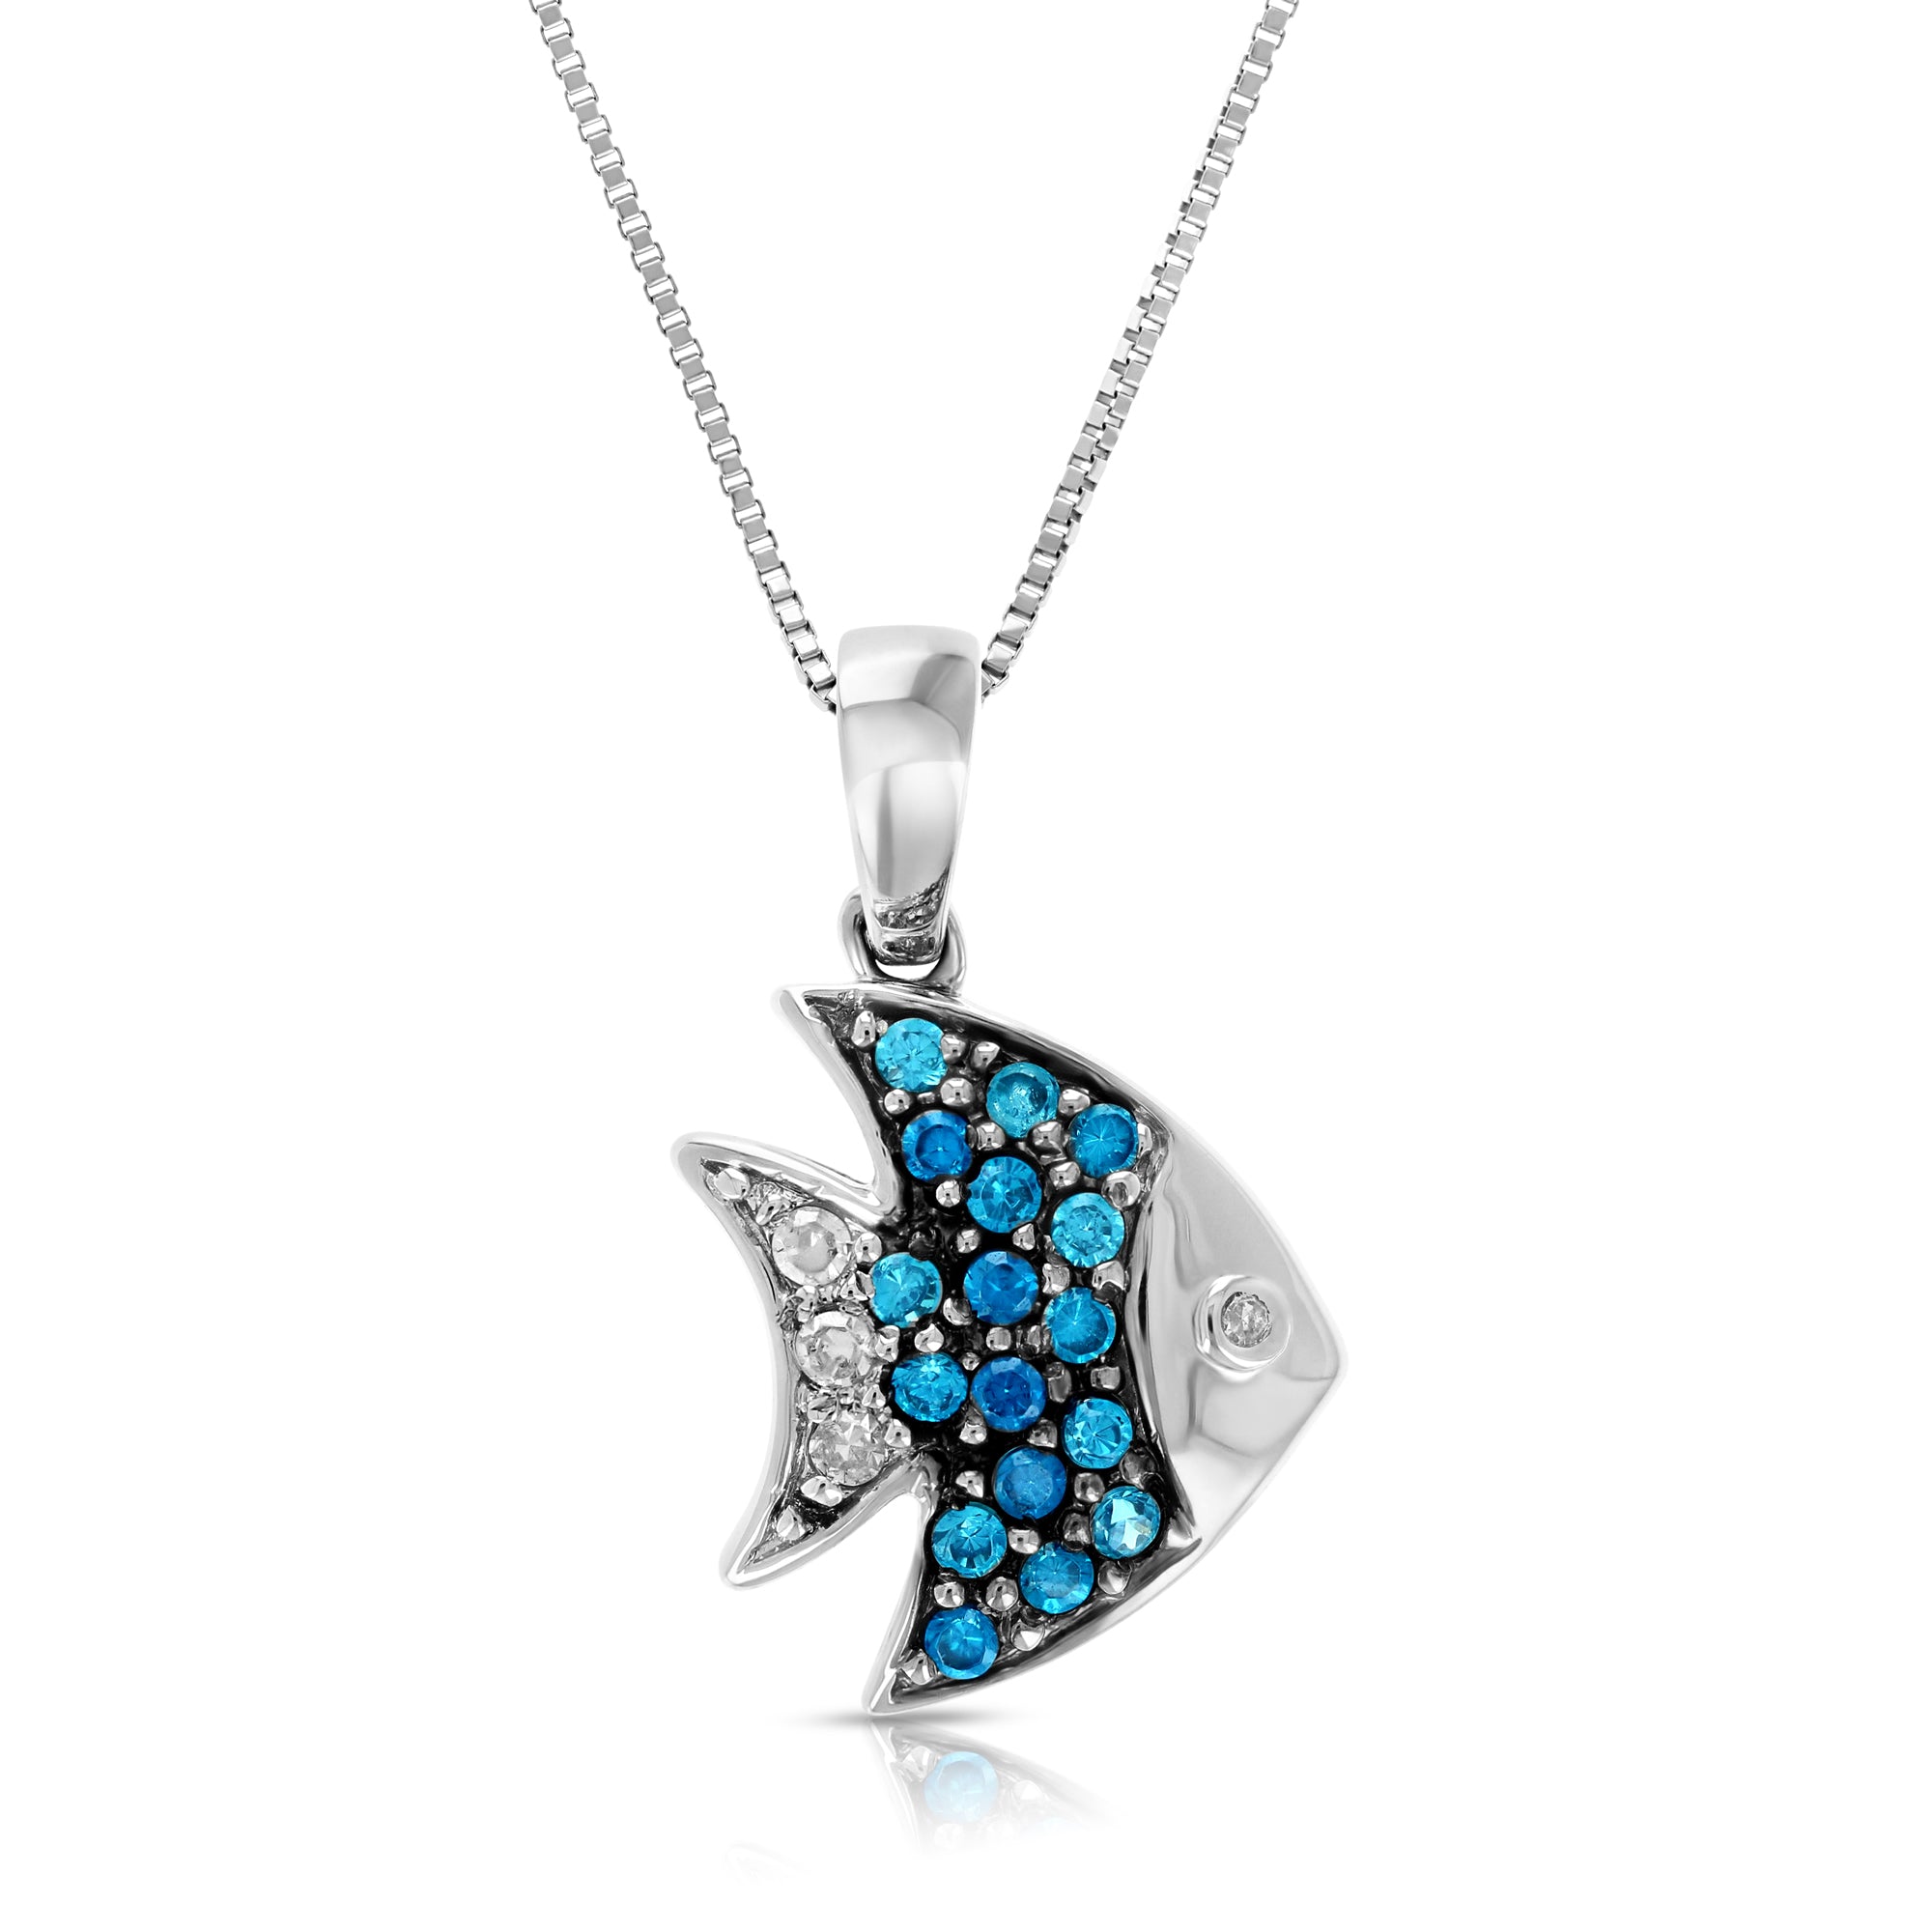 1/2 cttw Blue Diamond Fish Pendant Necklace 14K White Gold with 18 Inch Chain